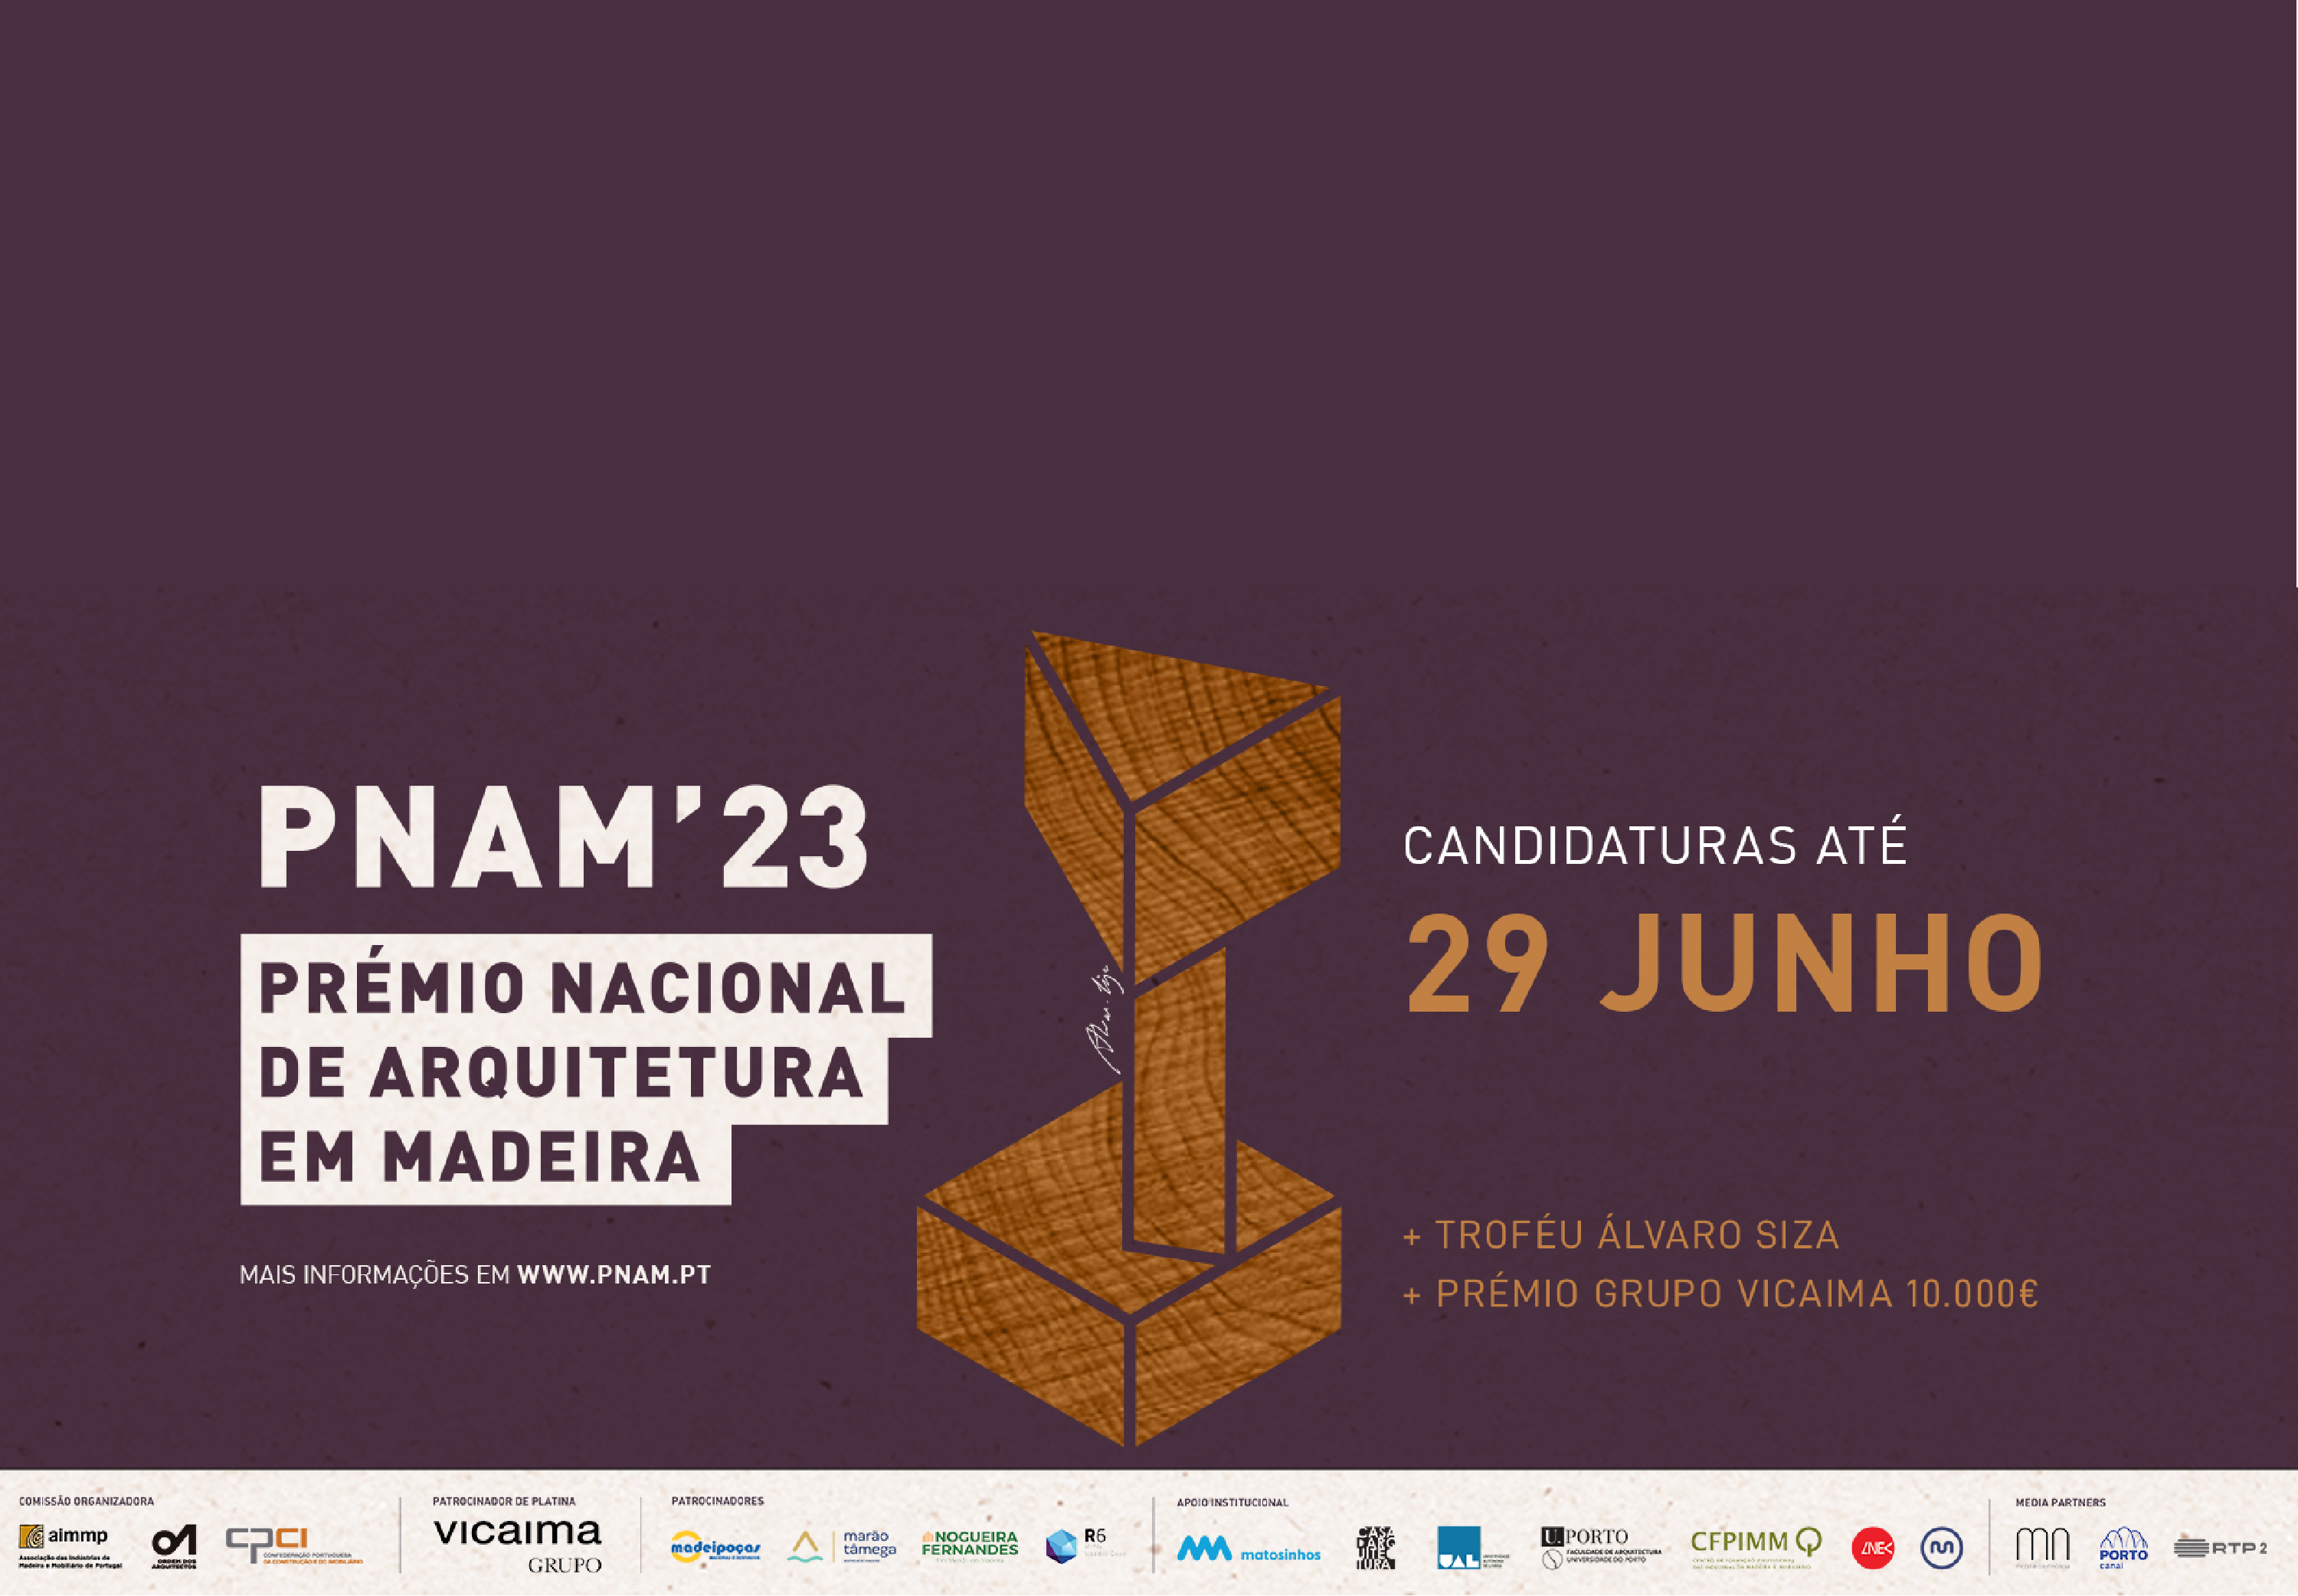 PNAM – National Prize for Architecture in Wood